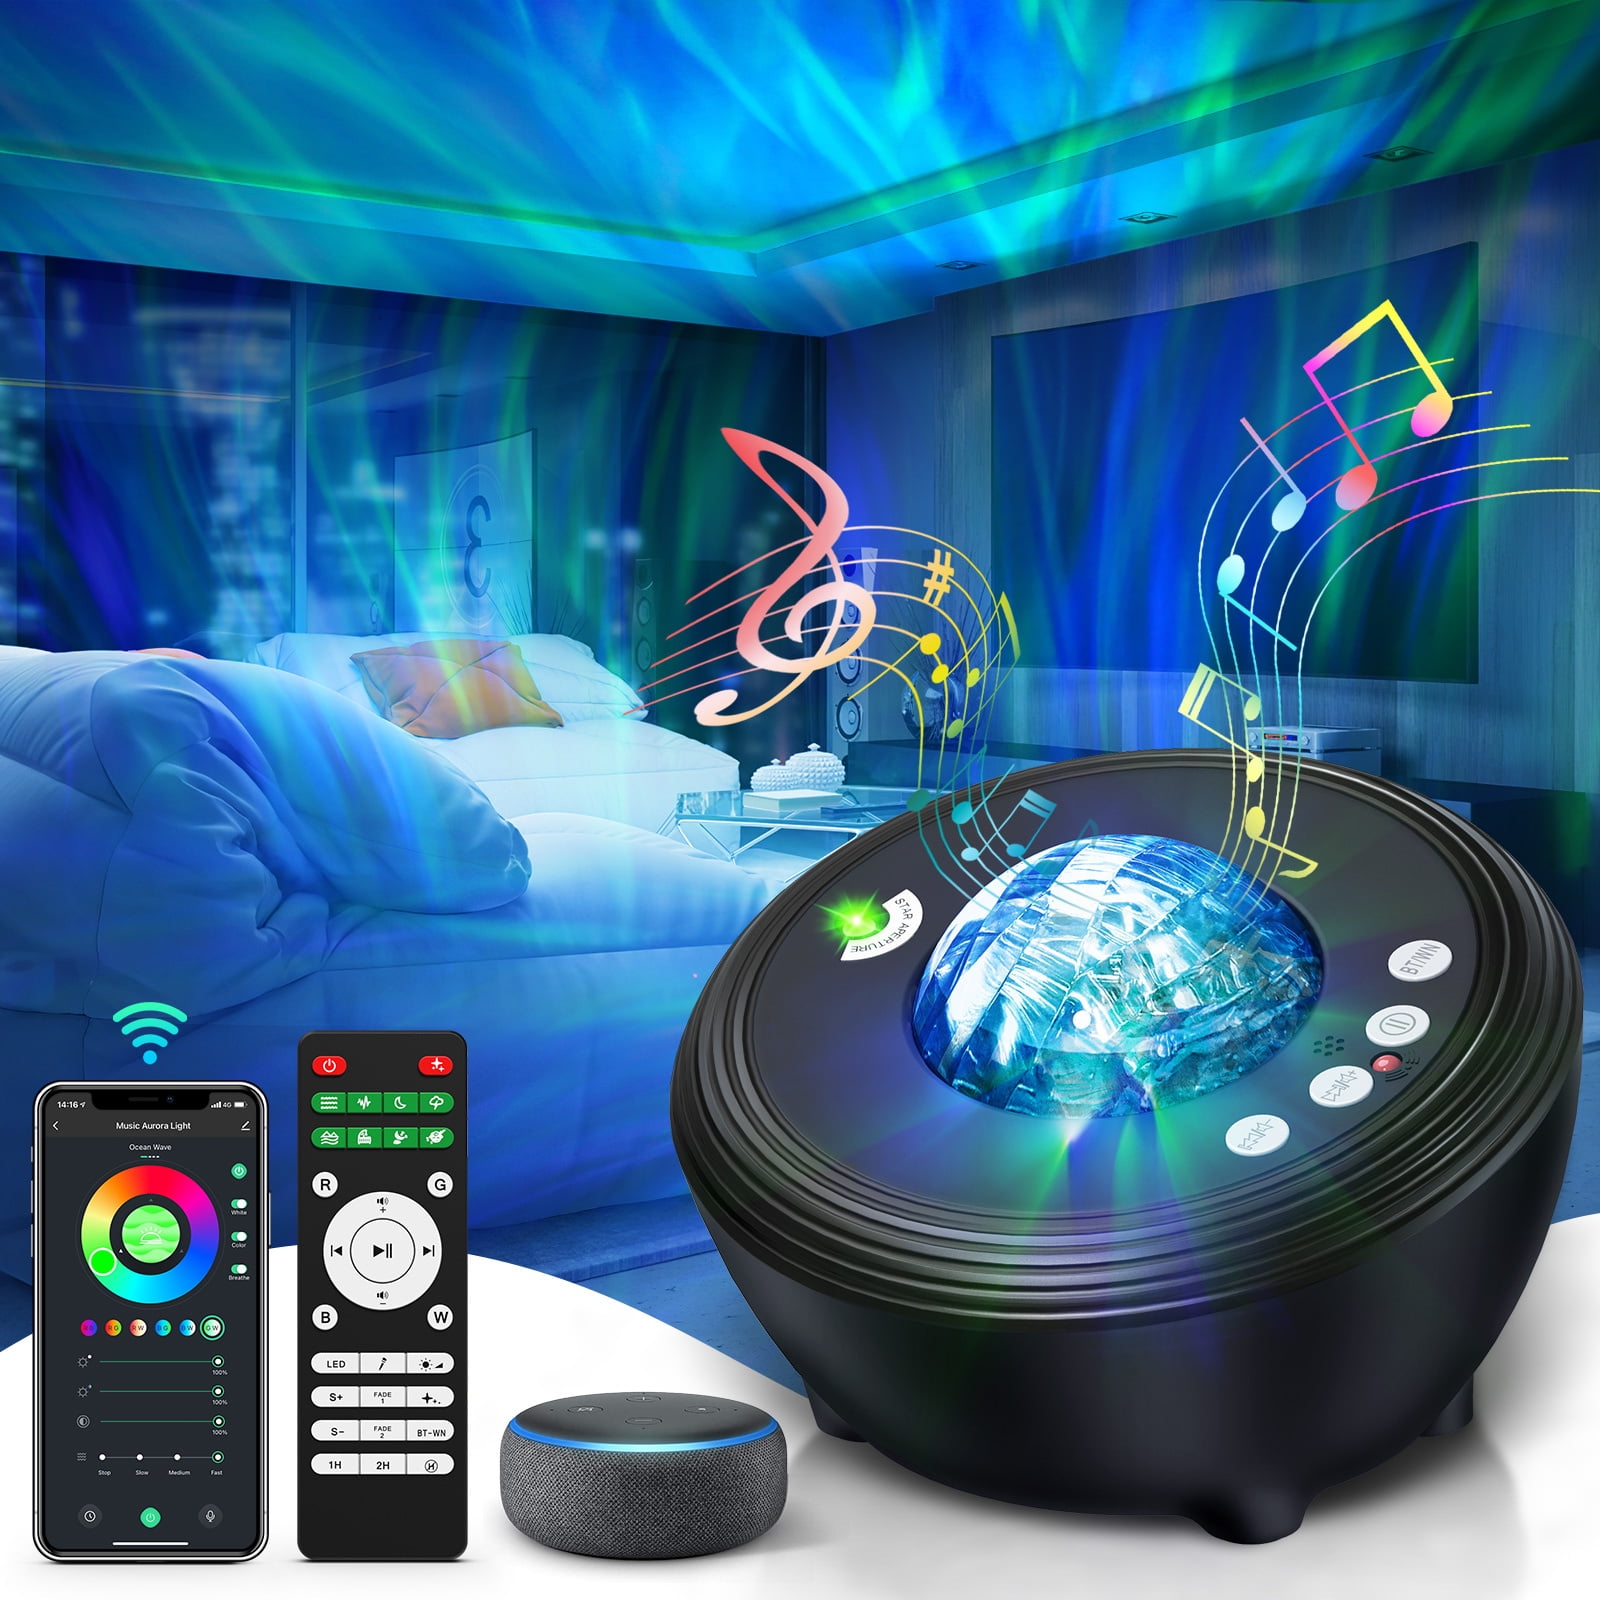 Galaxy Projector Star Projector, Star Night Light Projector for Bedroom  with Bluetooth Speaker, Timer, Remote Control, 10 Color Effects, Alexa 